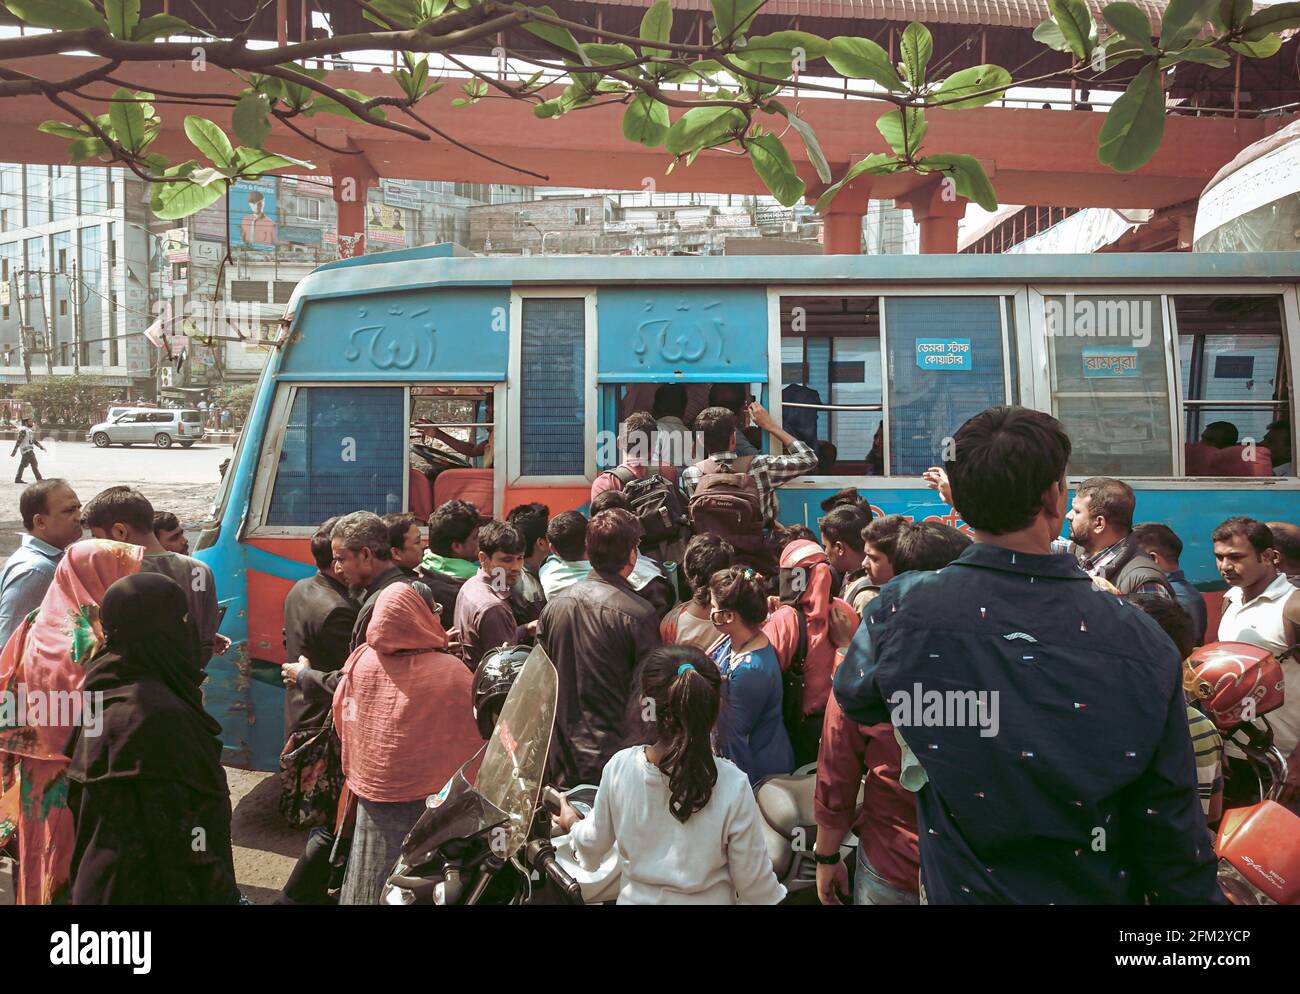 people's crowd in a public bus in the street of Dhaka . Stock Photo